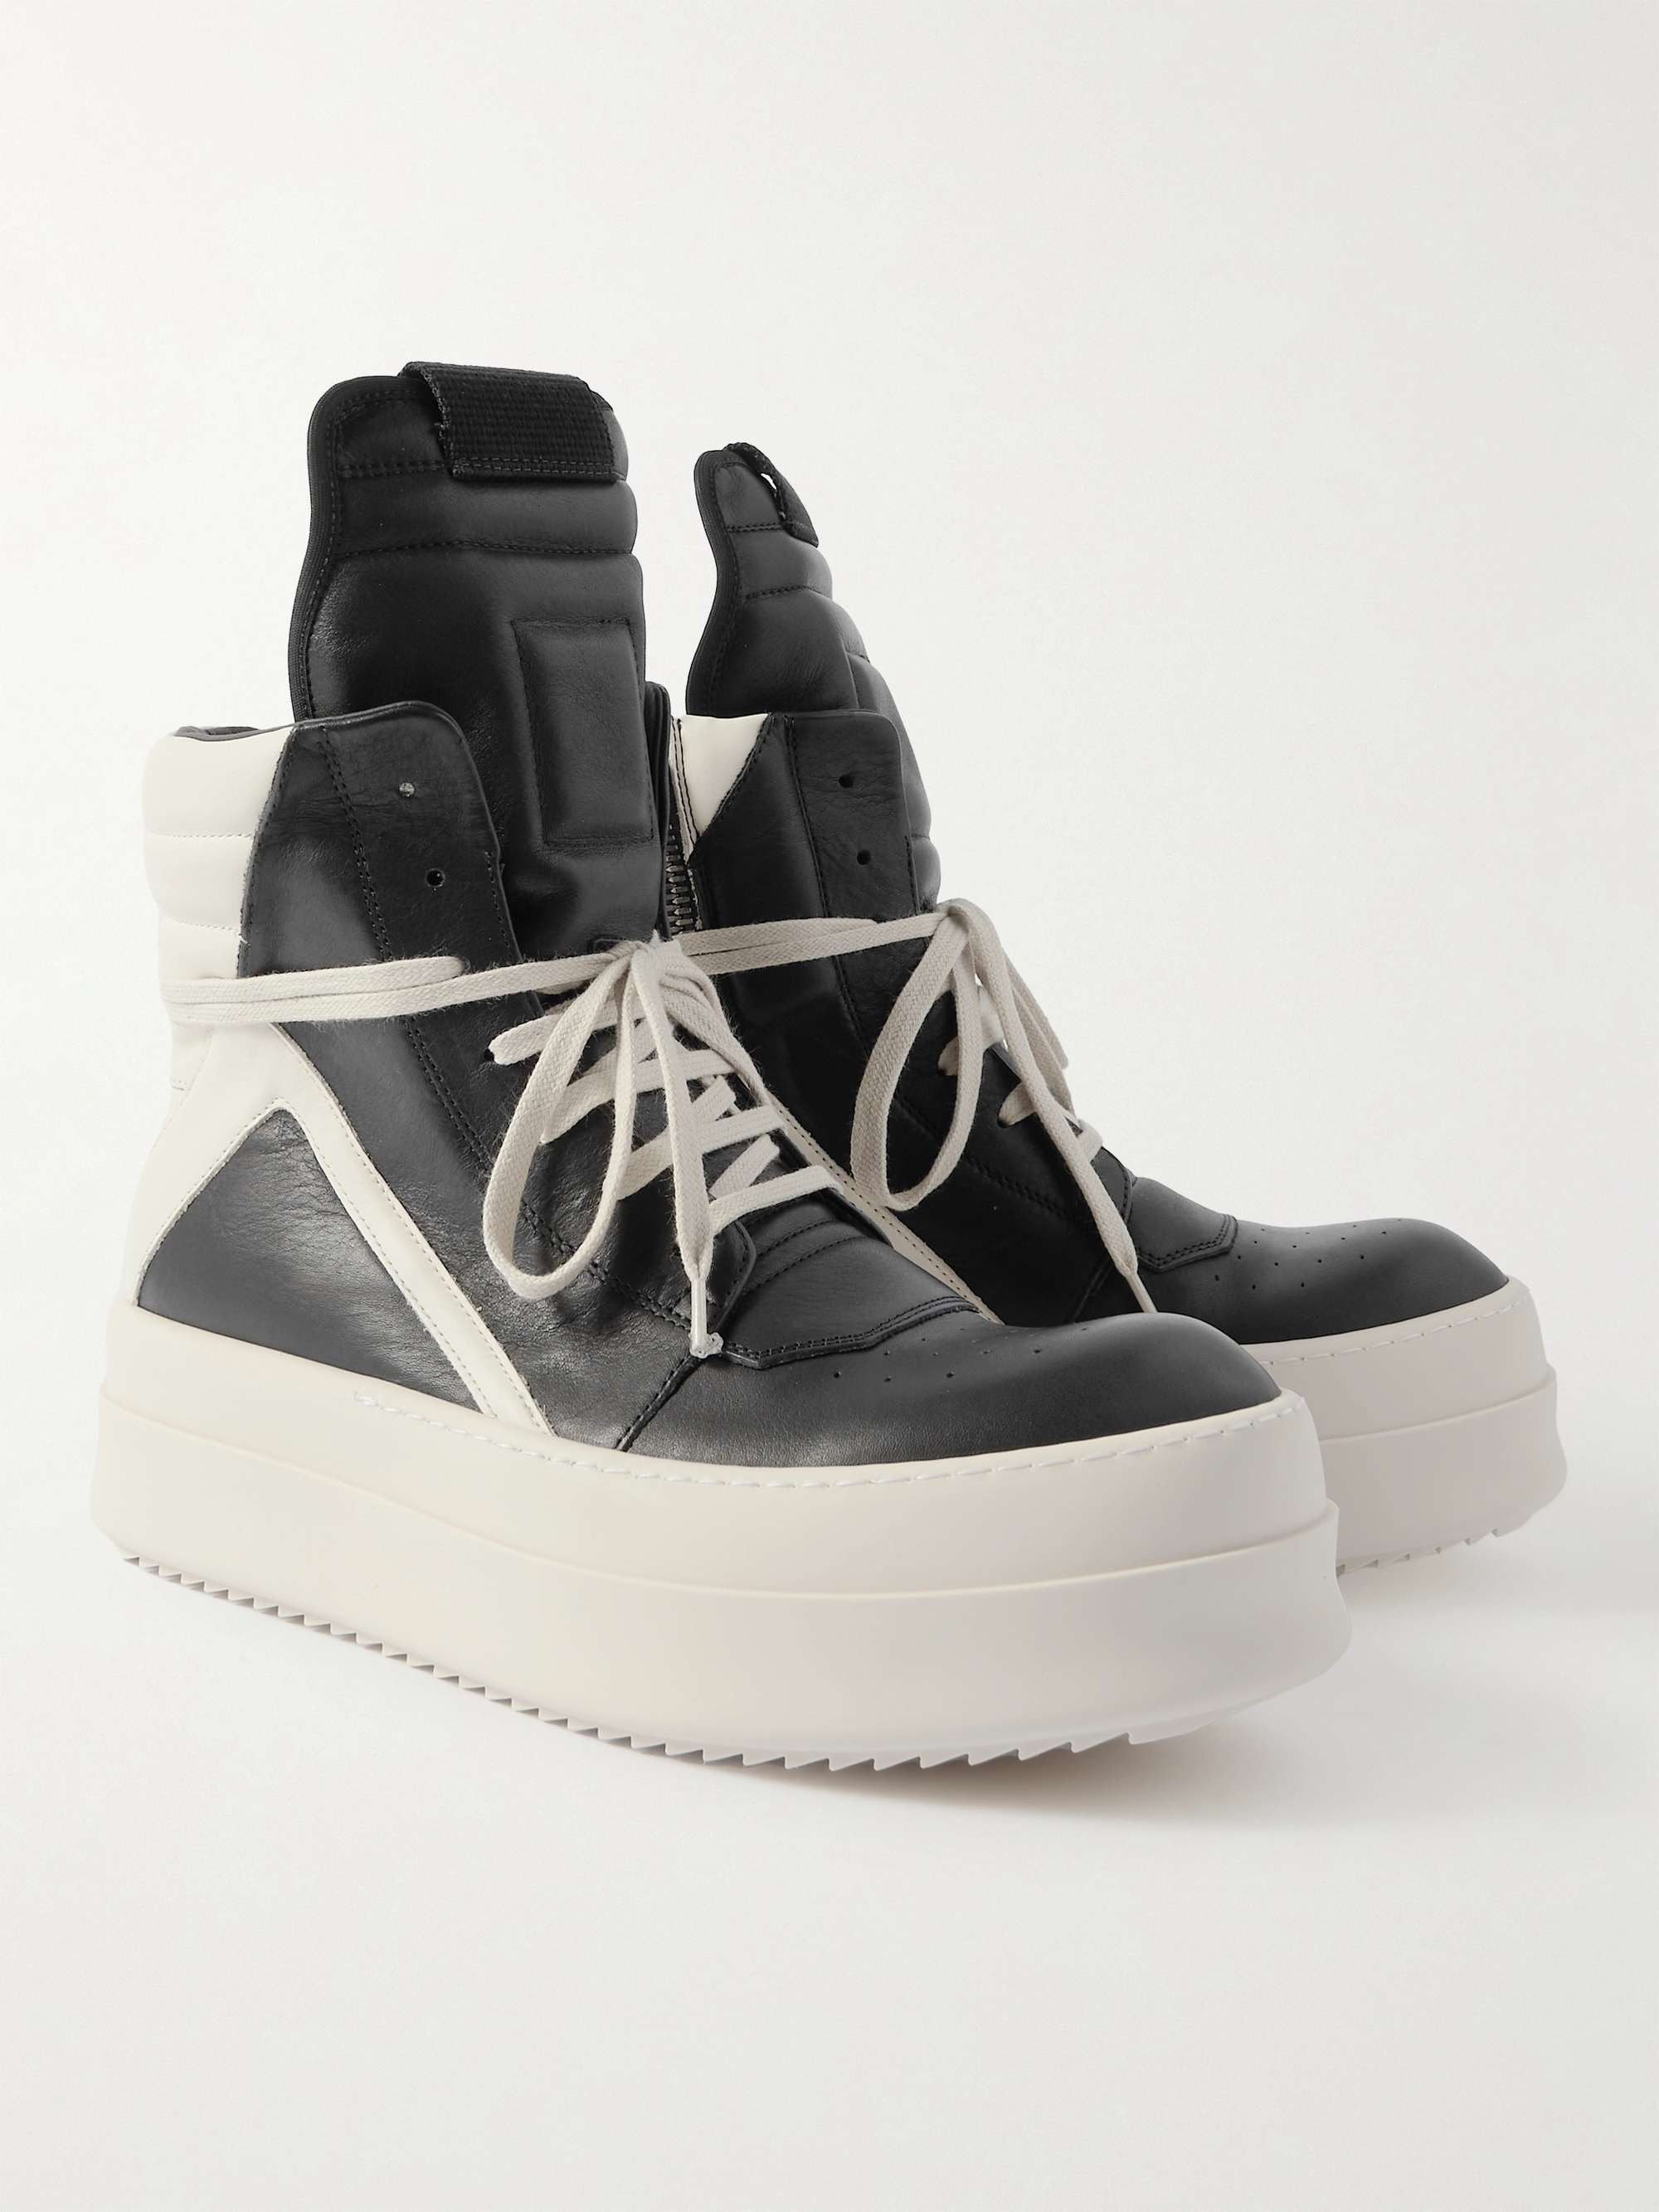 RICK OWENS Geobasket Mega Bumper Exaggerated-Sole Two-Tone Leather High ...